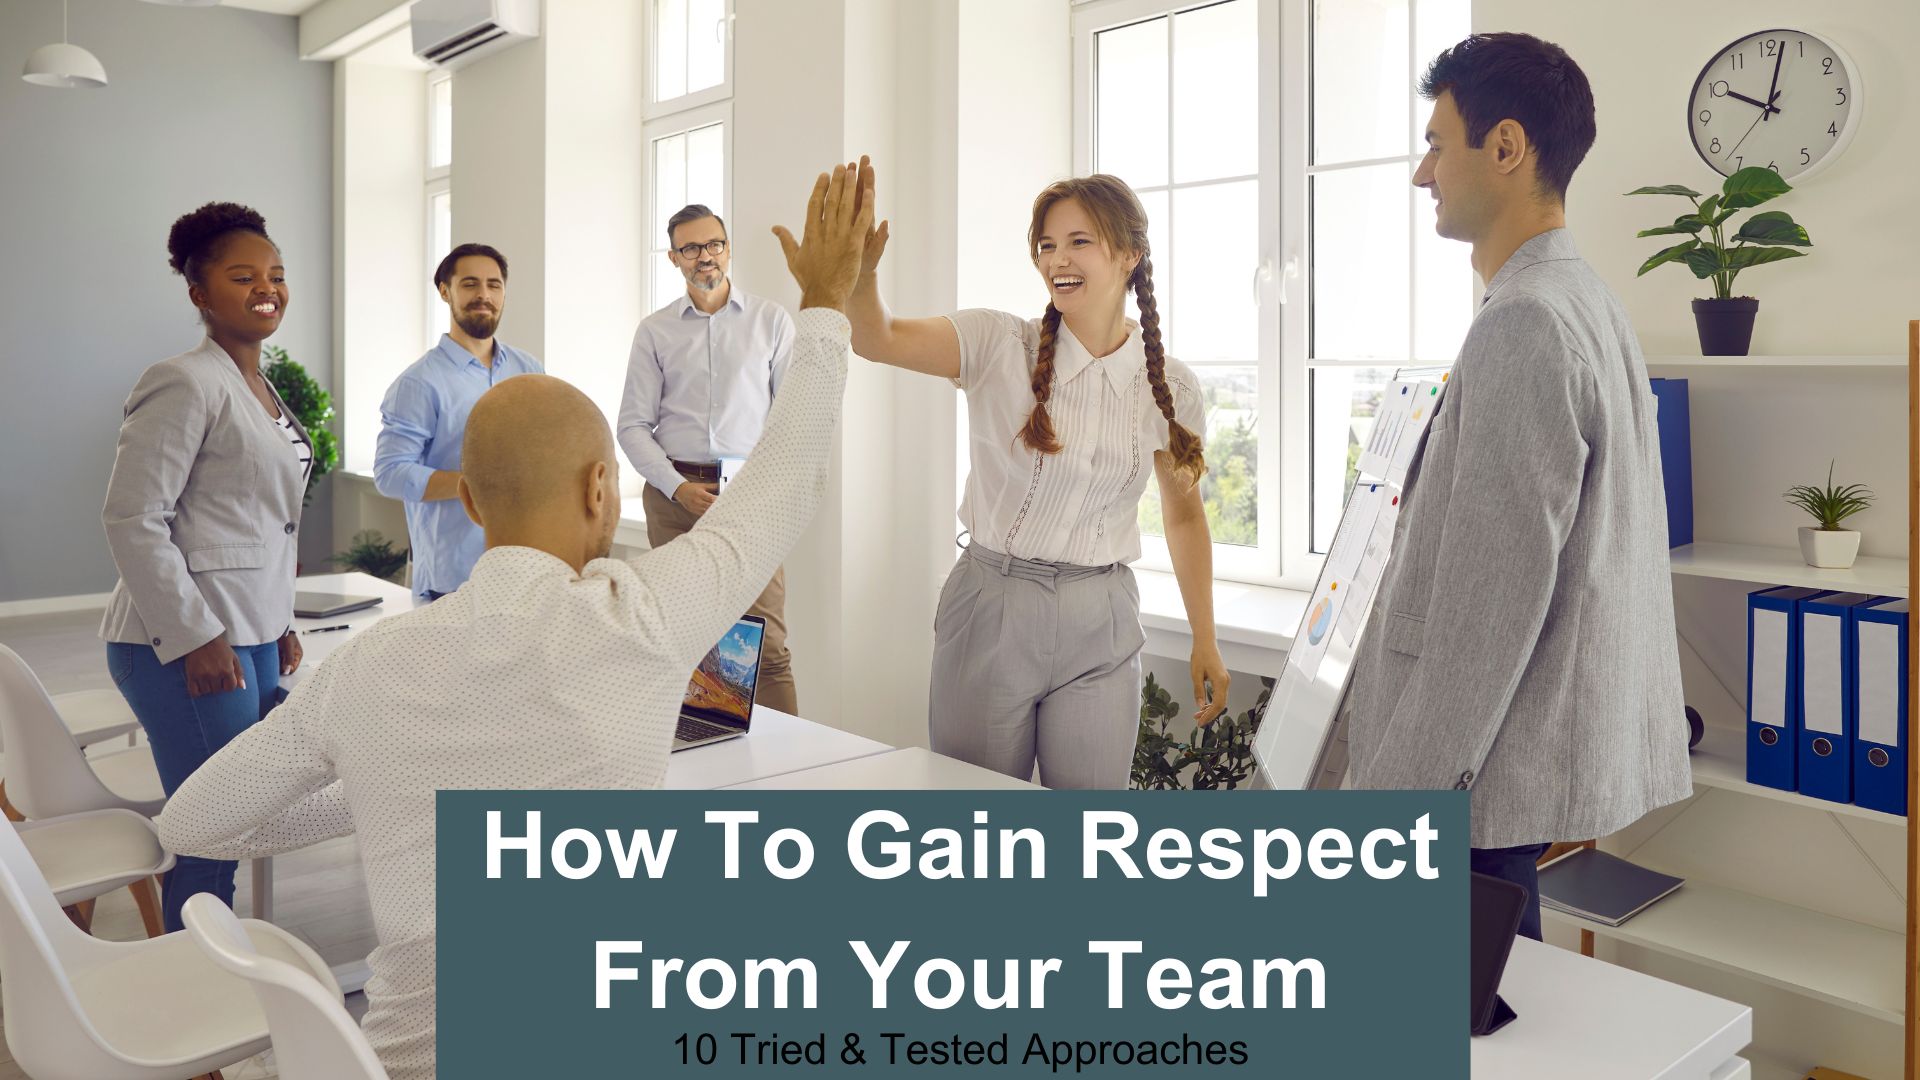 How to gain respect from your team - 10 tried and tested approaches